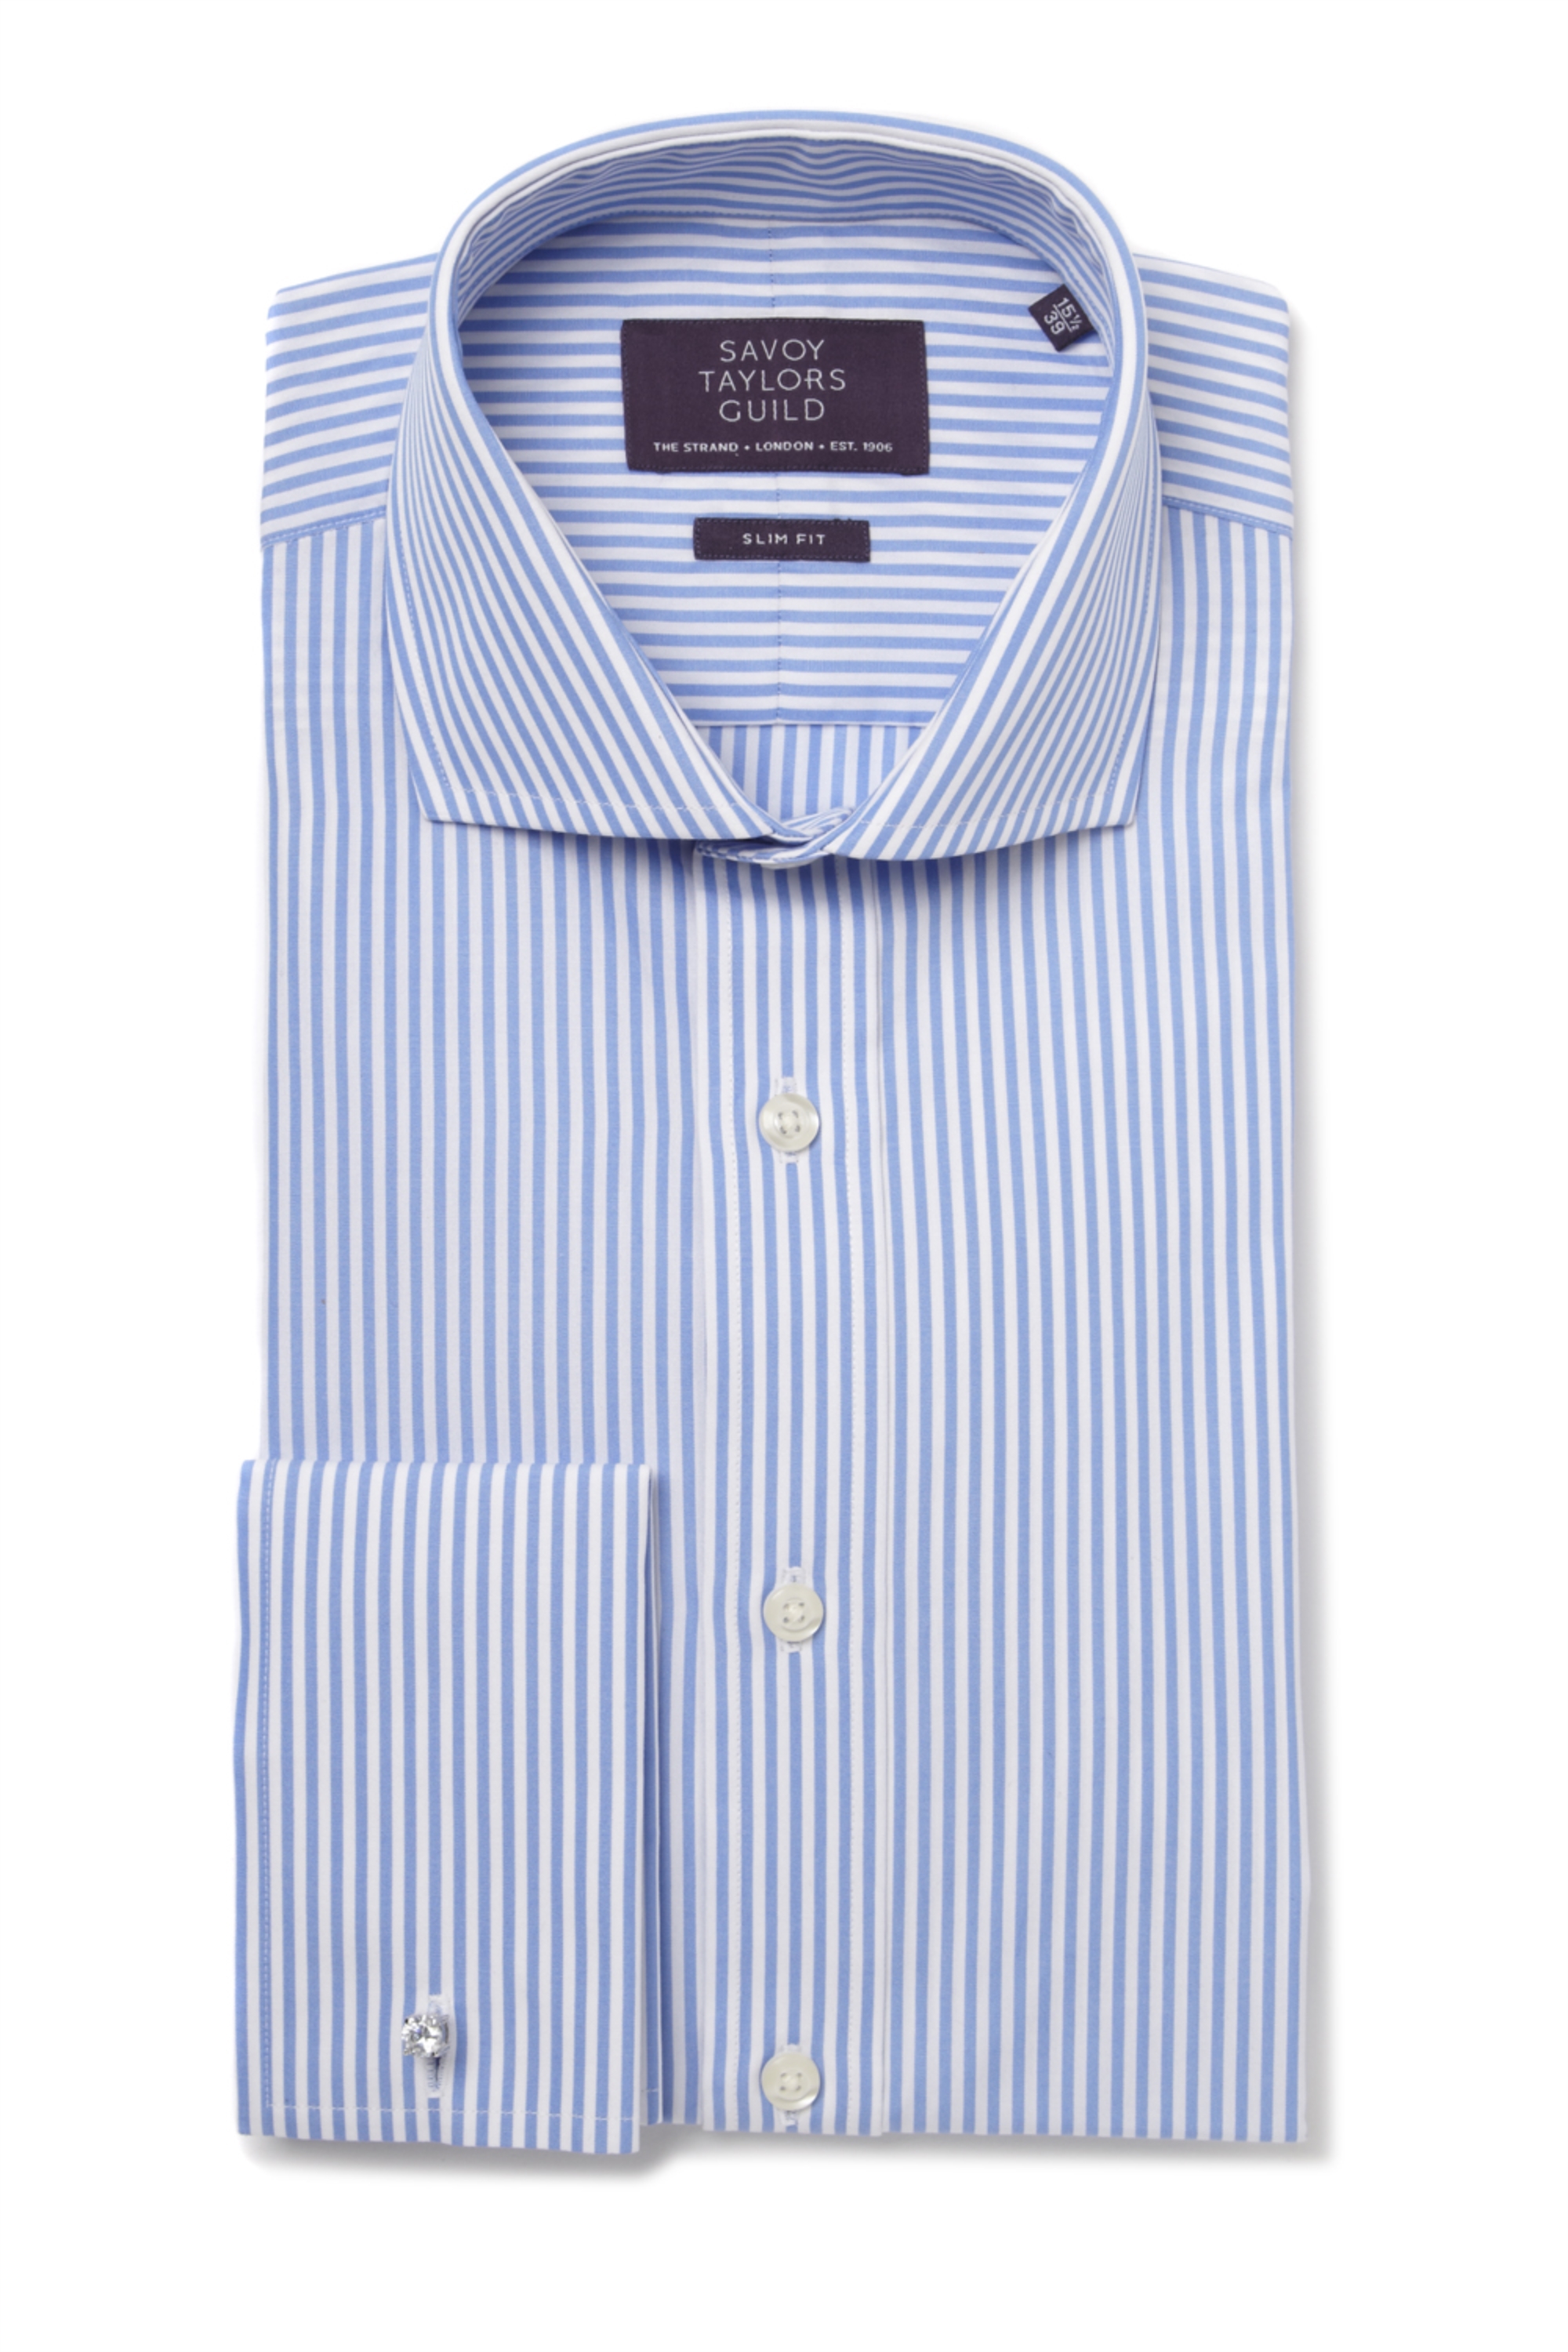 Savoy Taylors Guild Slim Fit Bengal Stripe Double Cuff Formal Shirt Blue